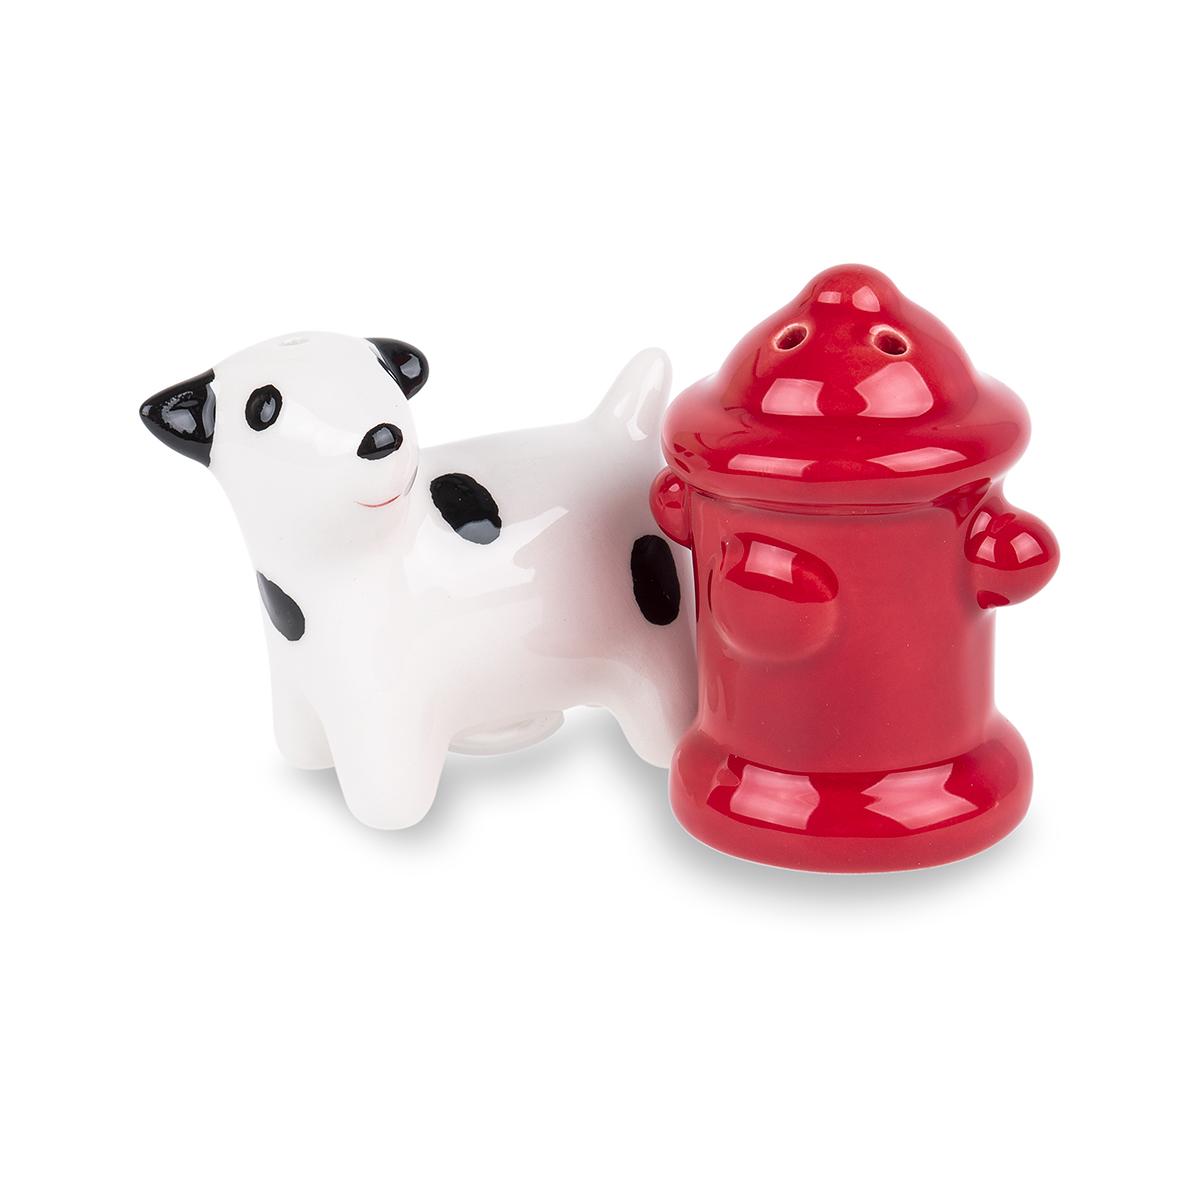  Dog And Hydrant Salt & Pepper Shakers